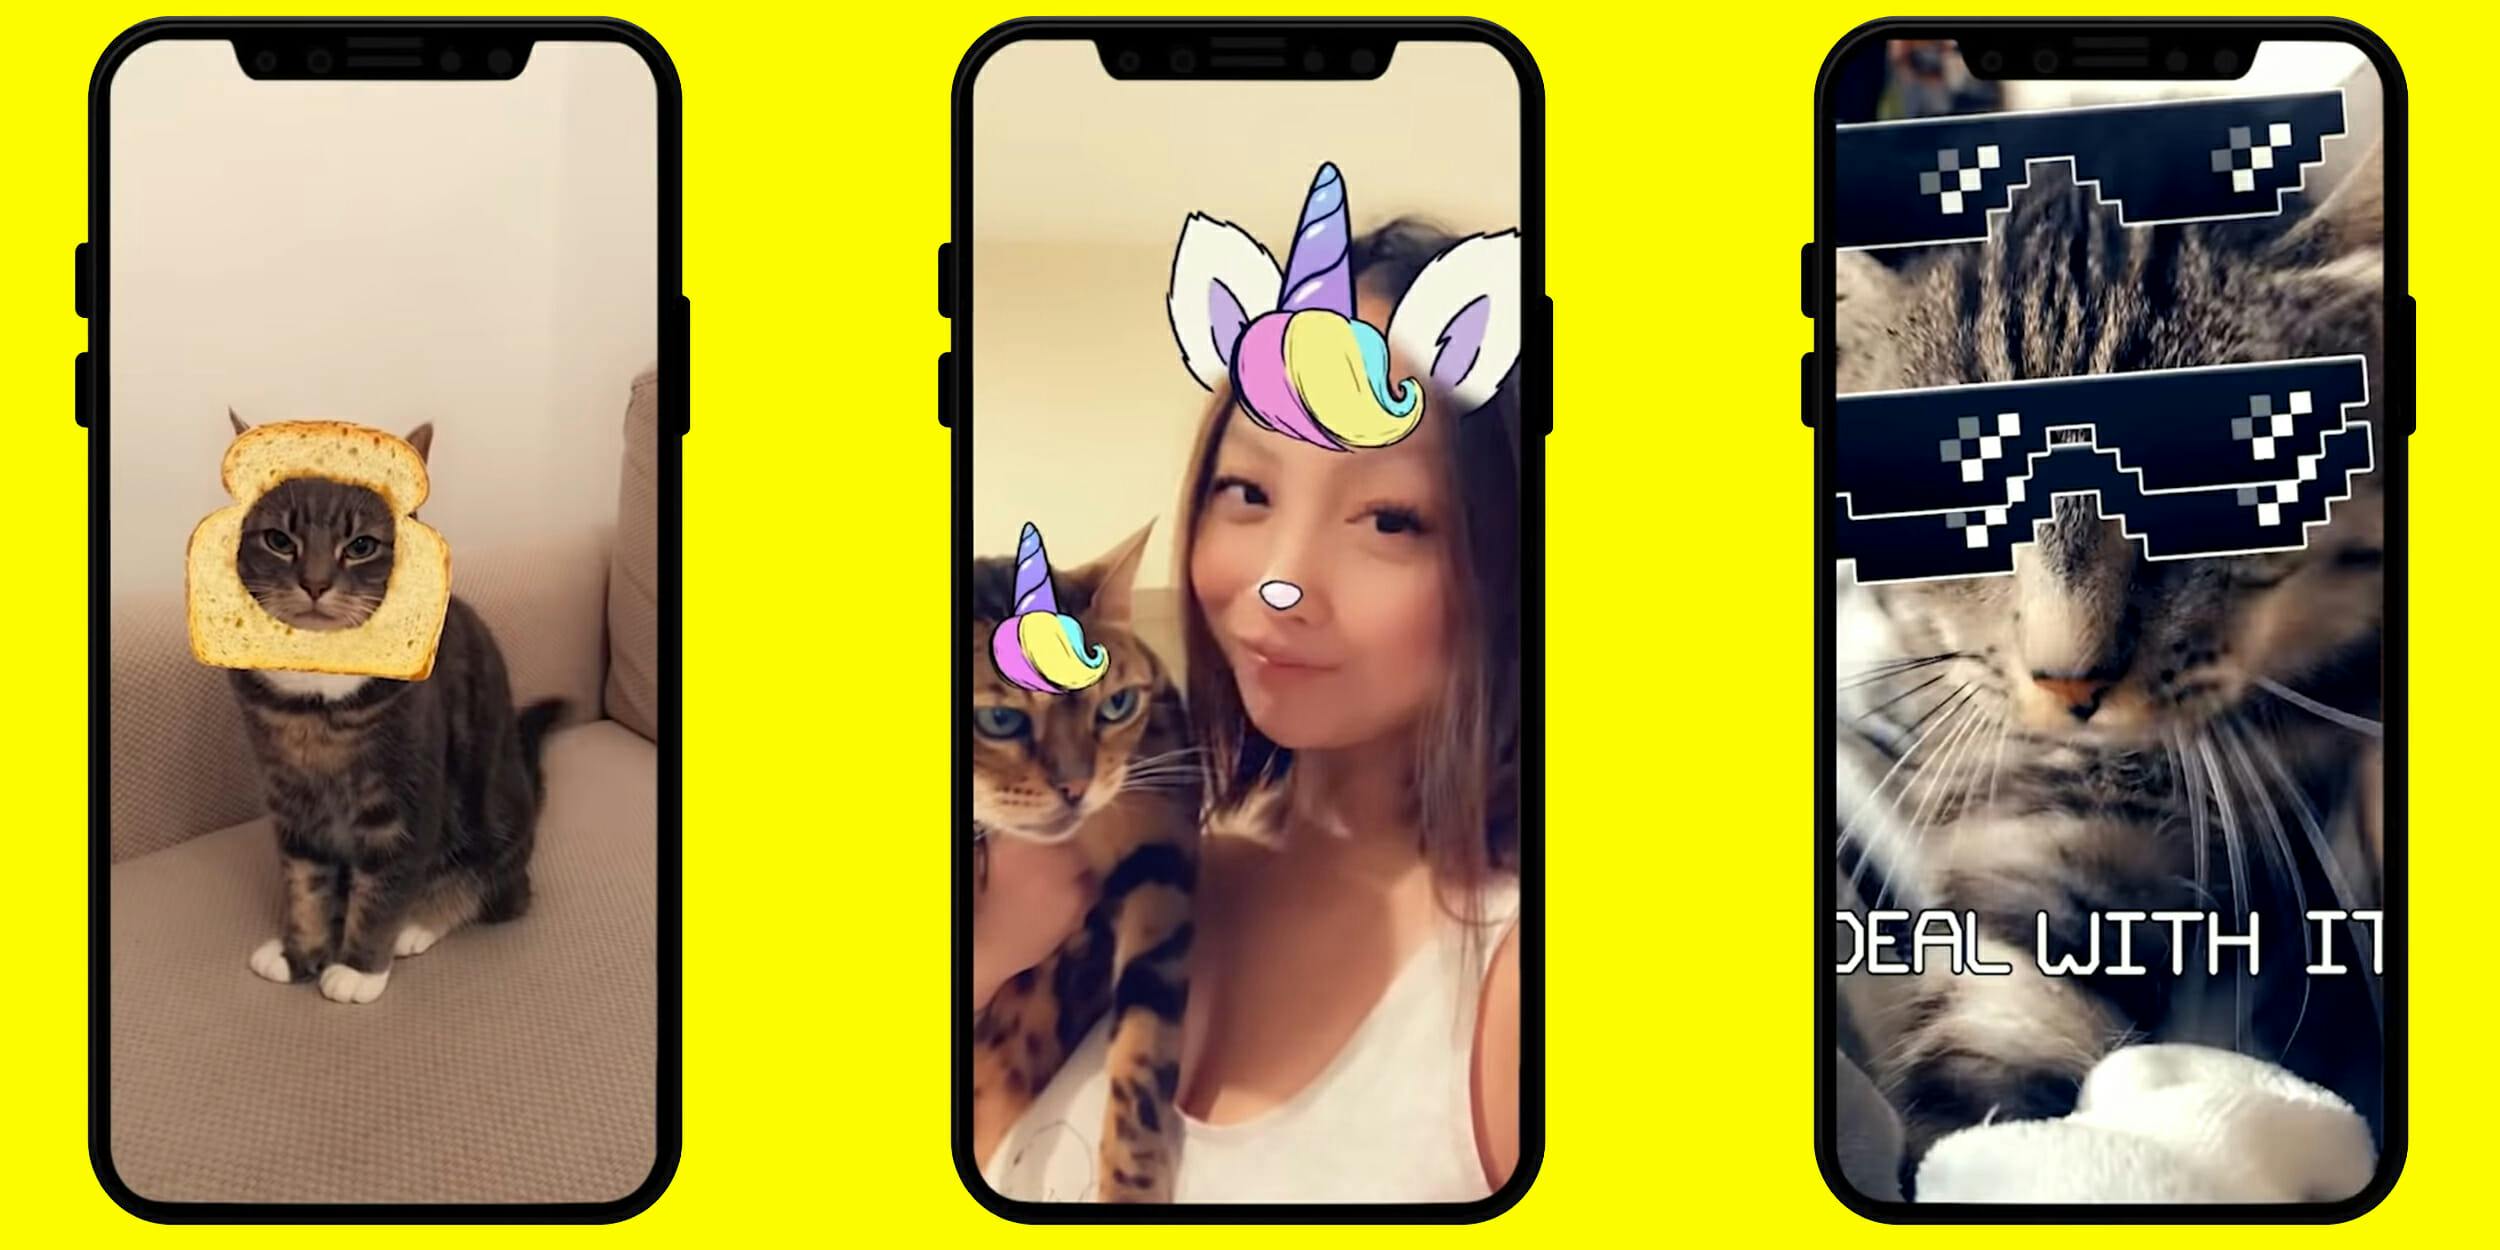 Cat vibing - bongo Lens by Prince 😼 - Snapchat Lenses and Filters